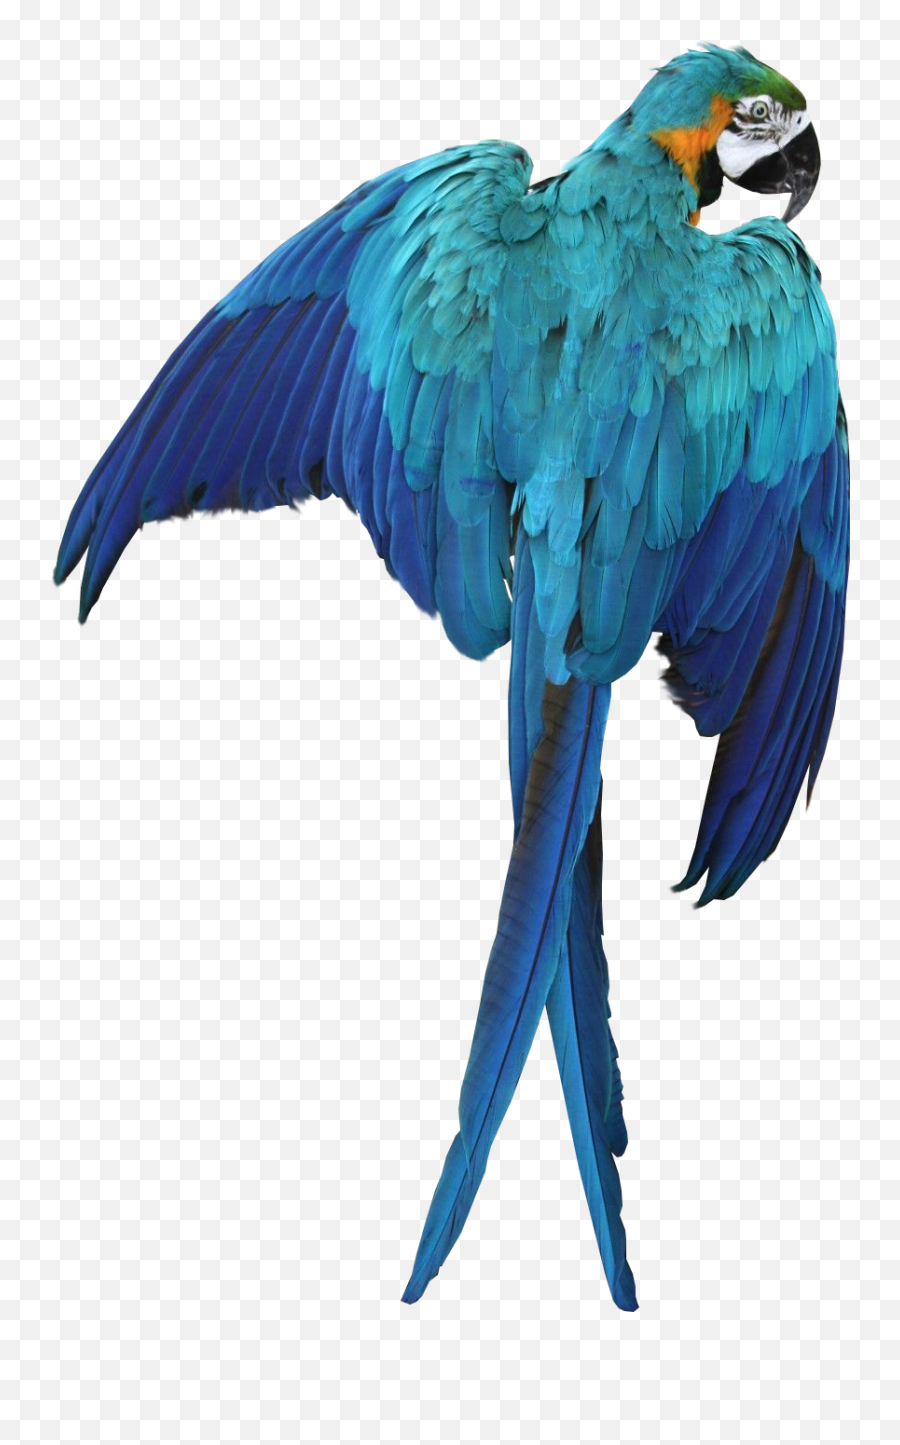 Macaw Parrot Transparent Background - Transparent Background Parrot Transparent Png,Parrot Transparent